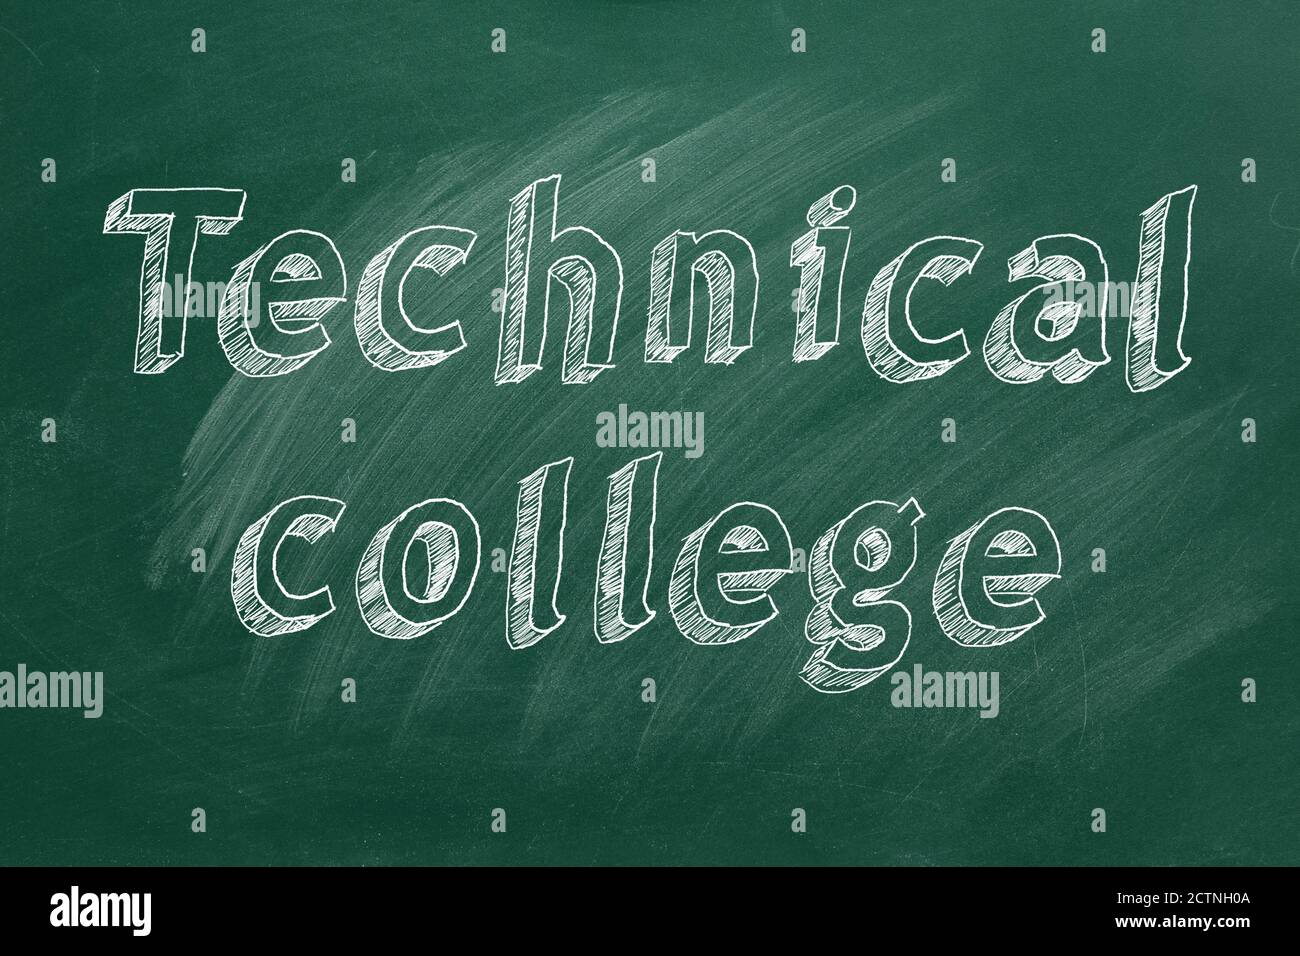 Hand drawing 'Technical college' on green chalkboard Stock Photo